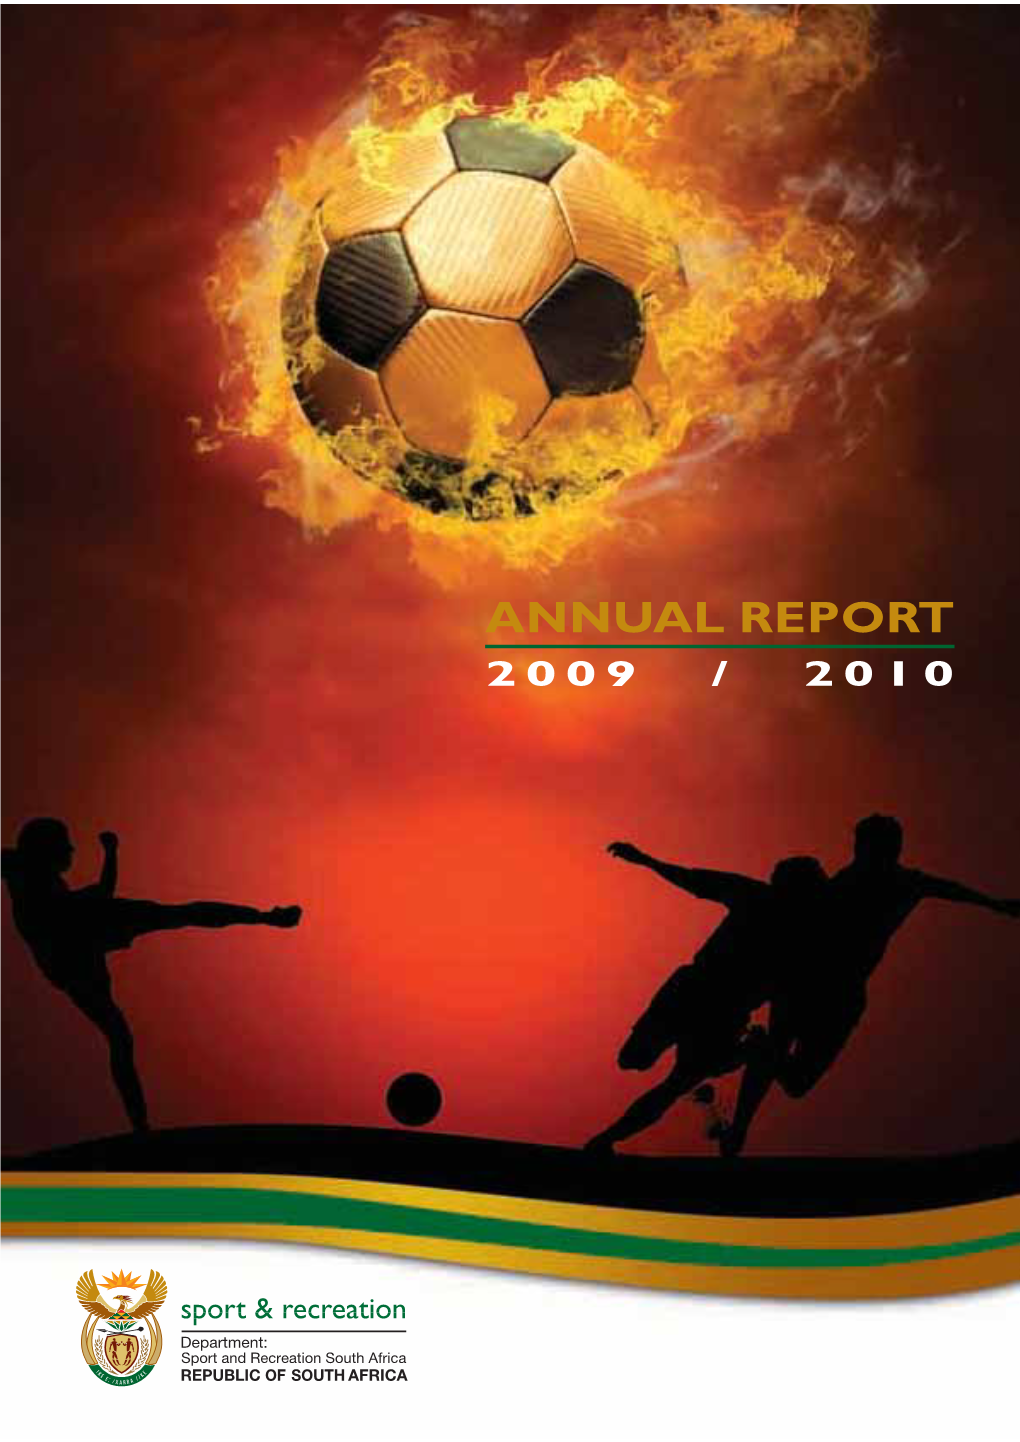 Department of Sport and Recreation South Africa Annual Report 2009/10